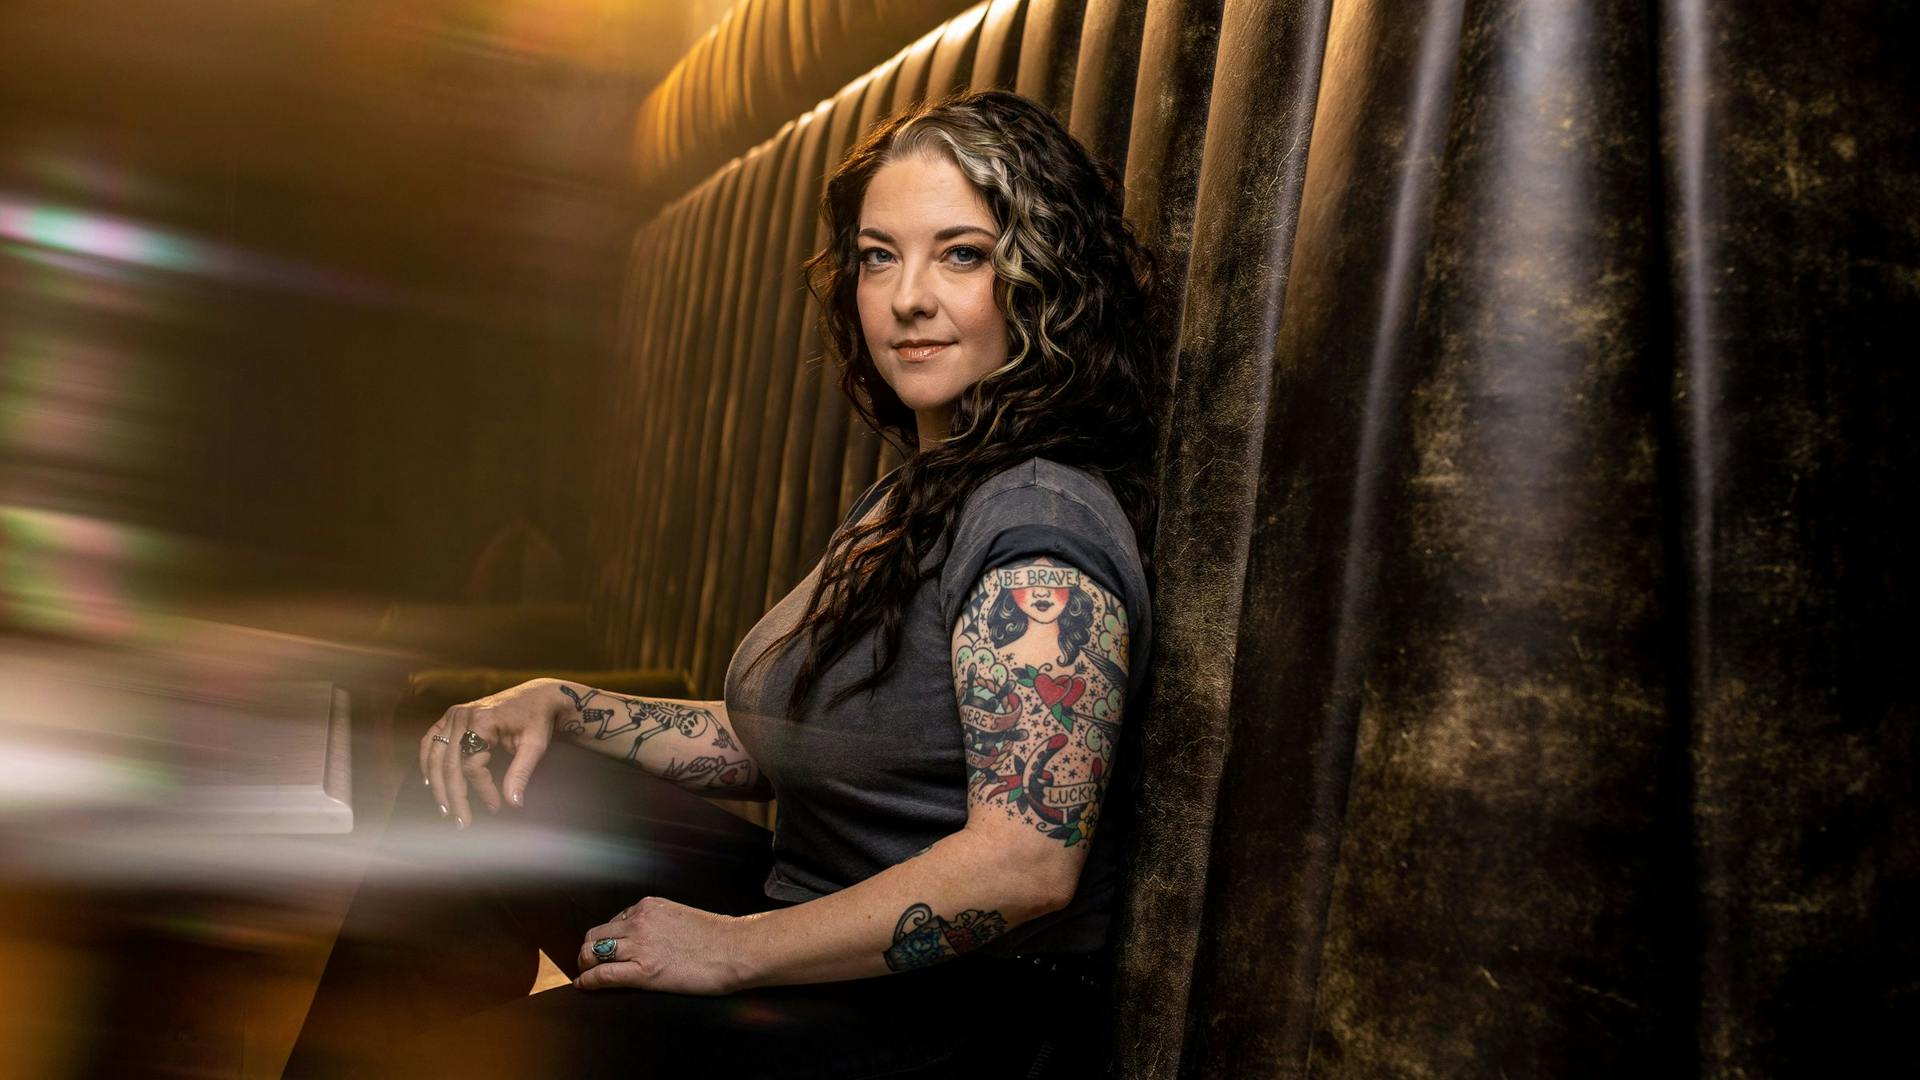 Ashley McBryde (SOLD OUT)